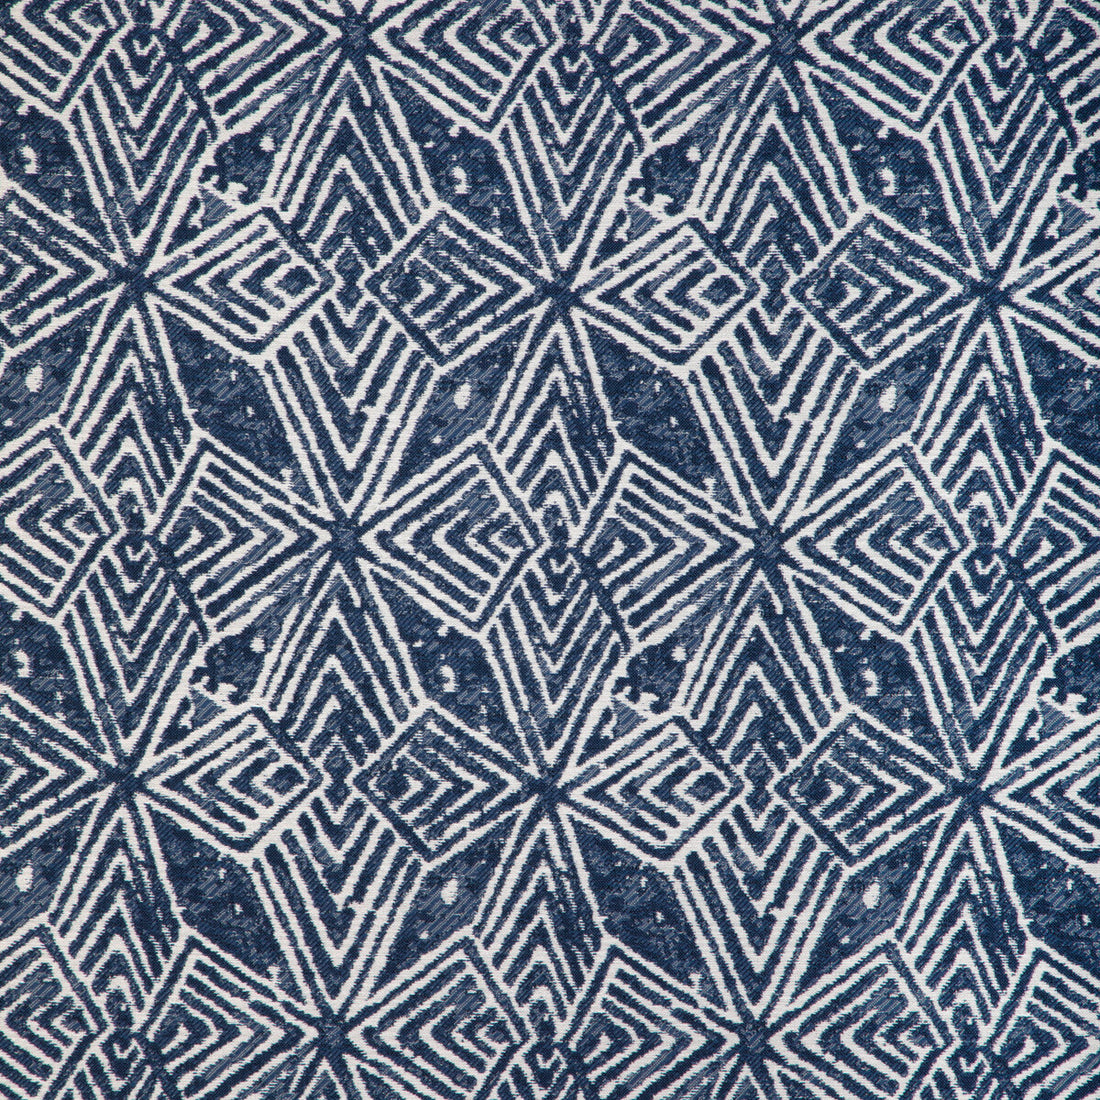 Kravet Design fabric in 36793-516 color - pattern 36793.516.0 - by Kravet Design in the Sea Island Inside Out collection